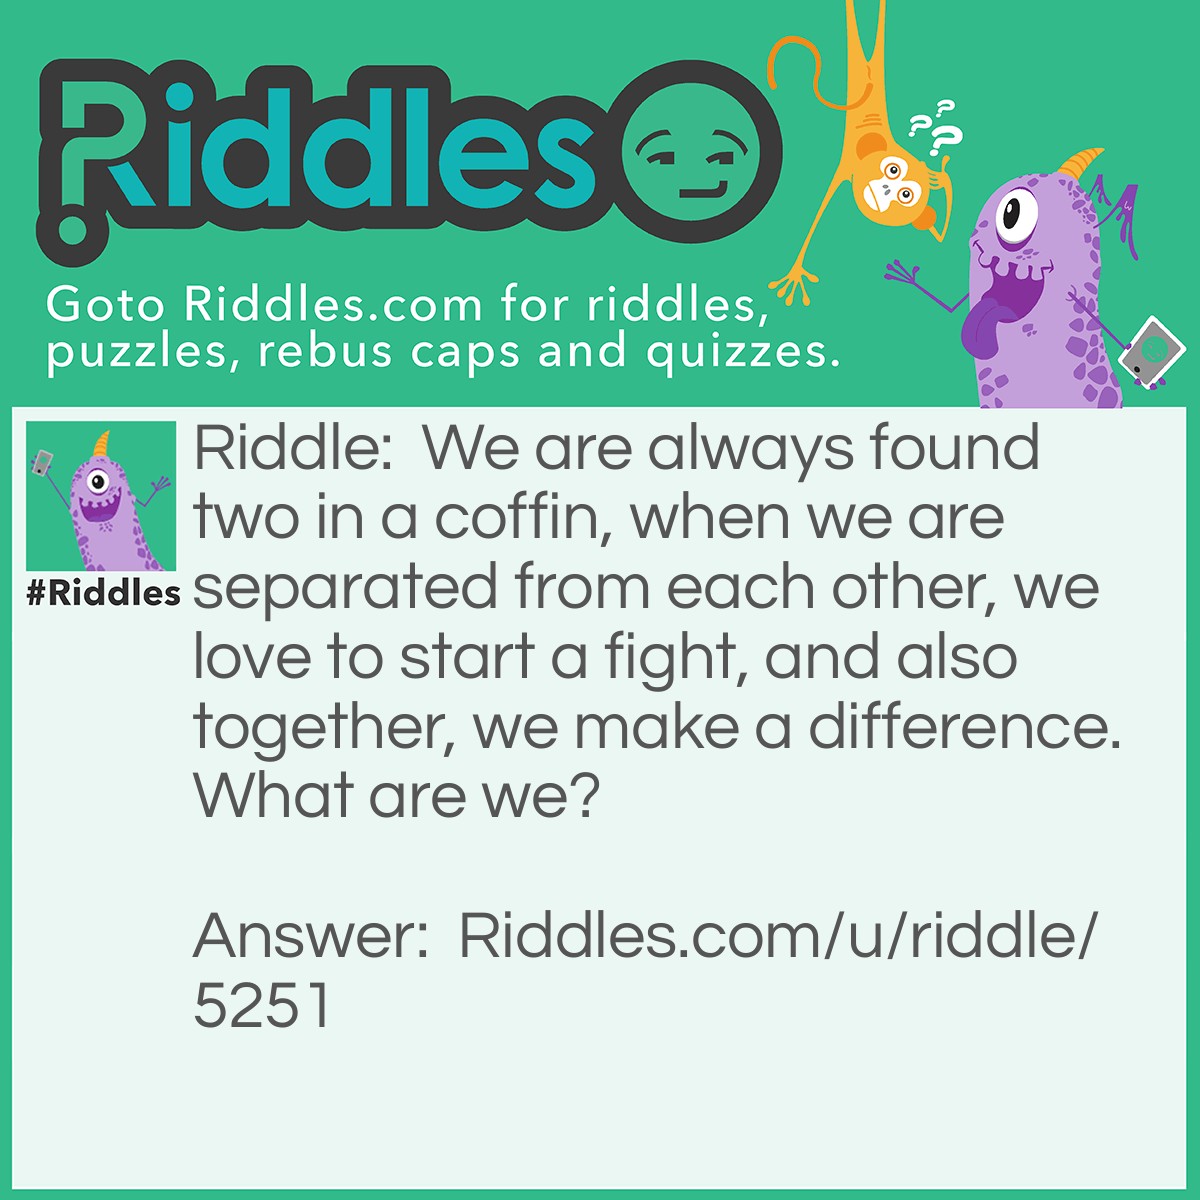 Riddle: We are always found two in a coffin, when we are separated from each other, we love to start a fight, and also together, we make a difference. What are we? Answer: The letter F.